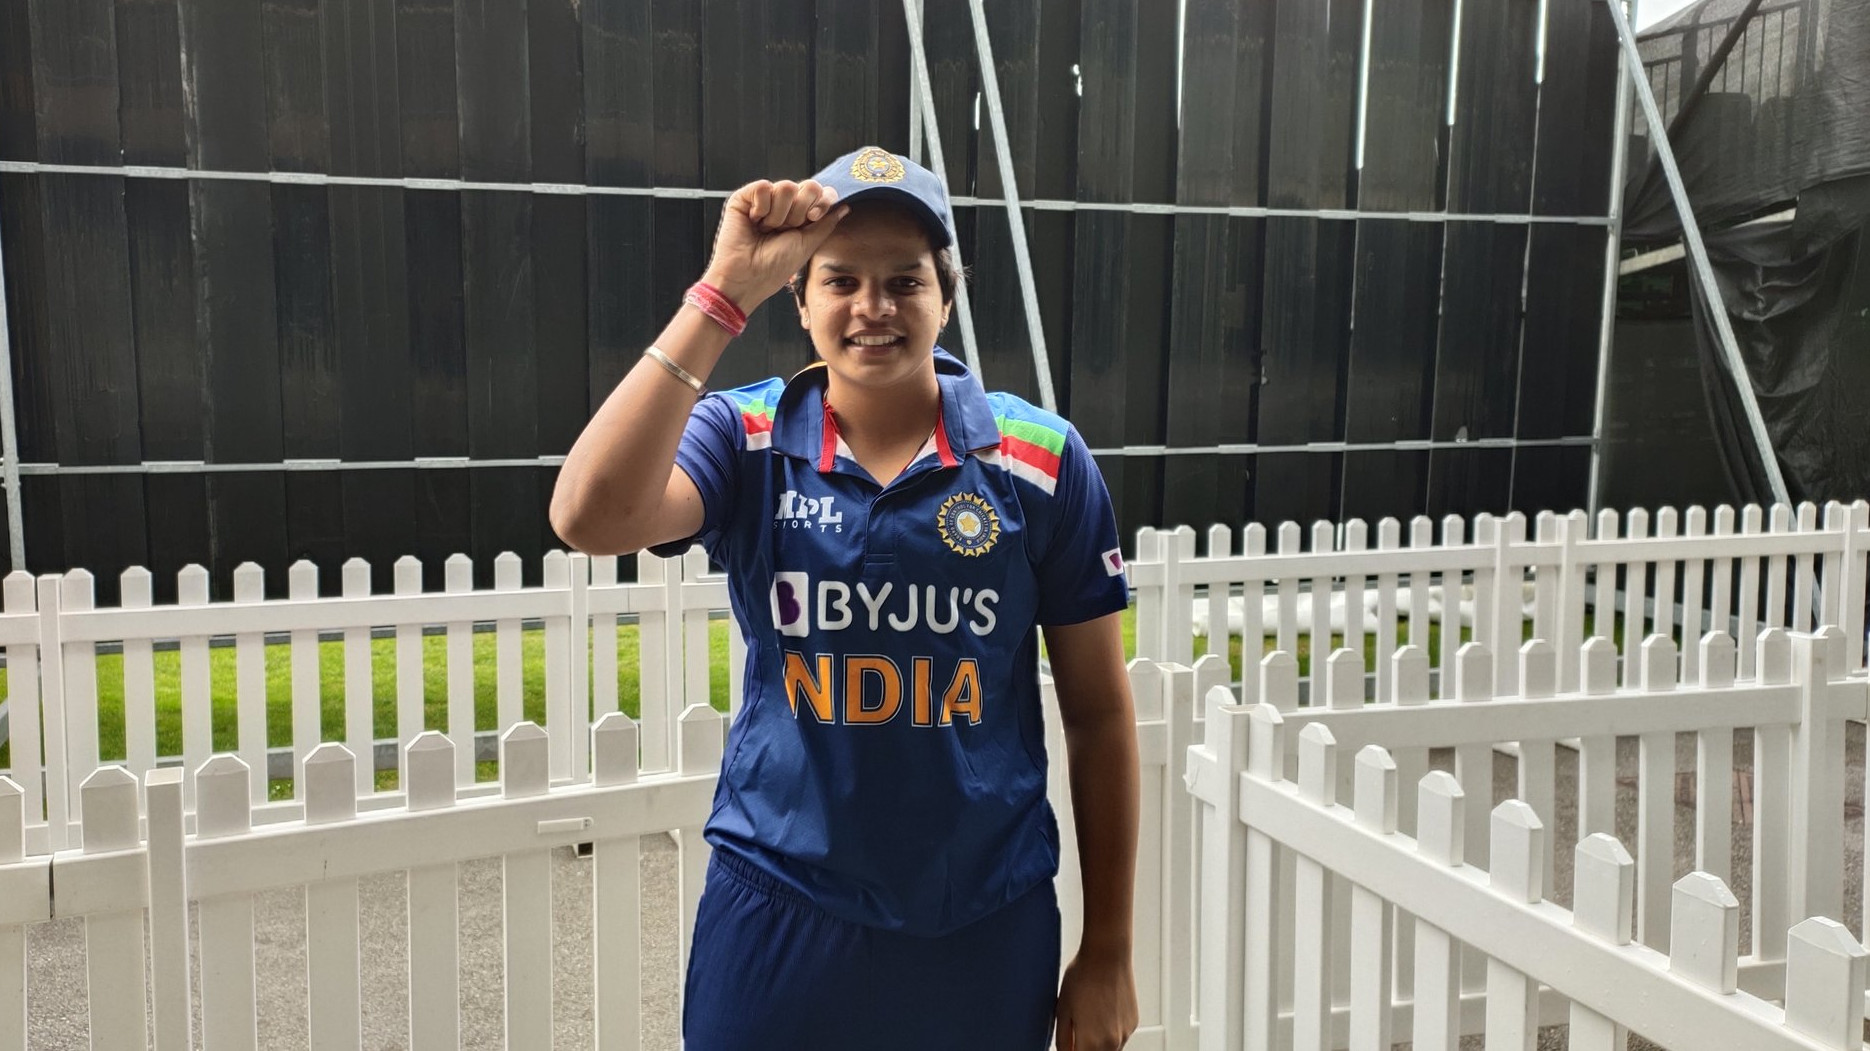 ENGW v INDW 2021: Shafali Verma becomes fifth youngest to play all three formats after ODI debut